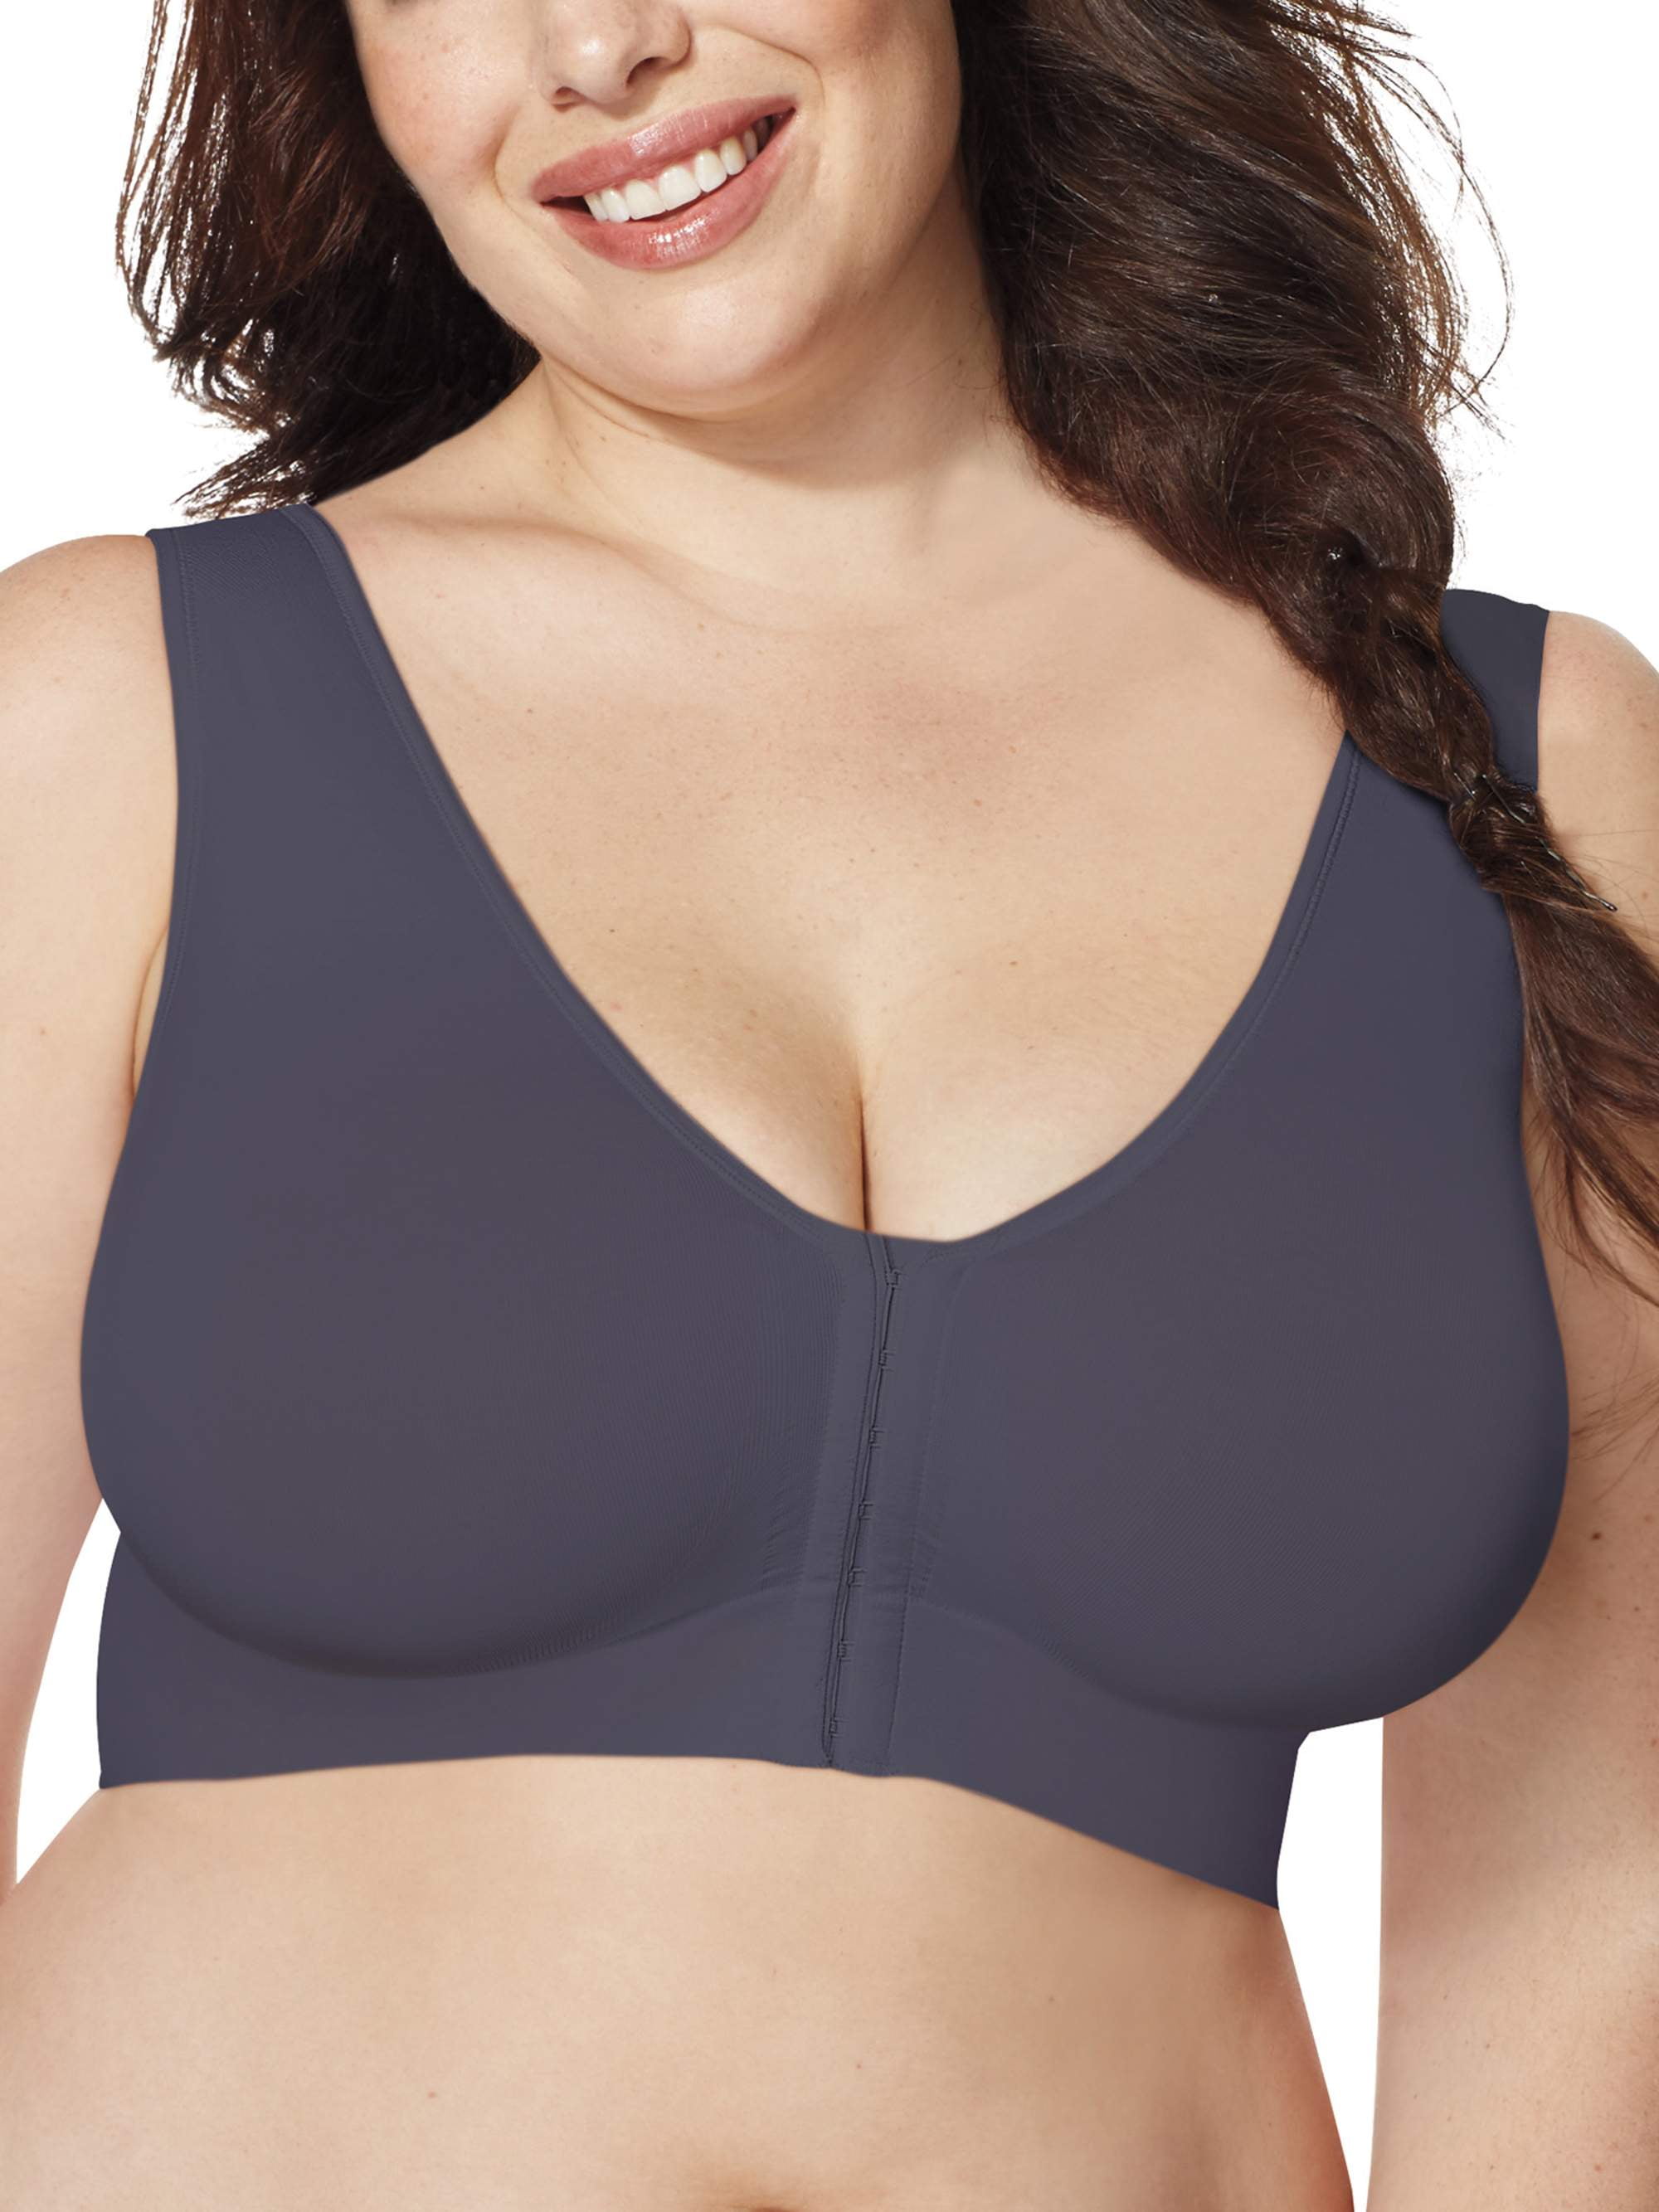 Just My Size PRIVATE JET Pure Comfort Front-Close Wirefree Bra, US 6X